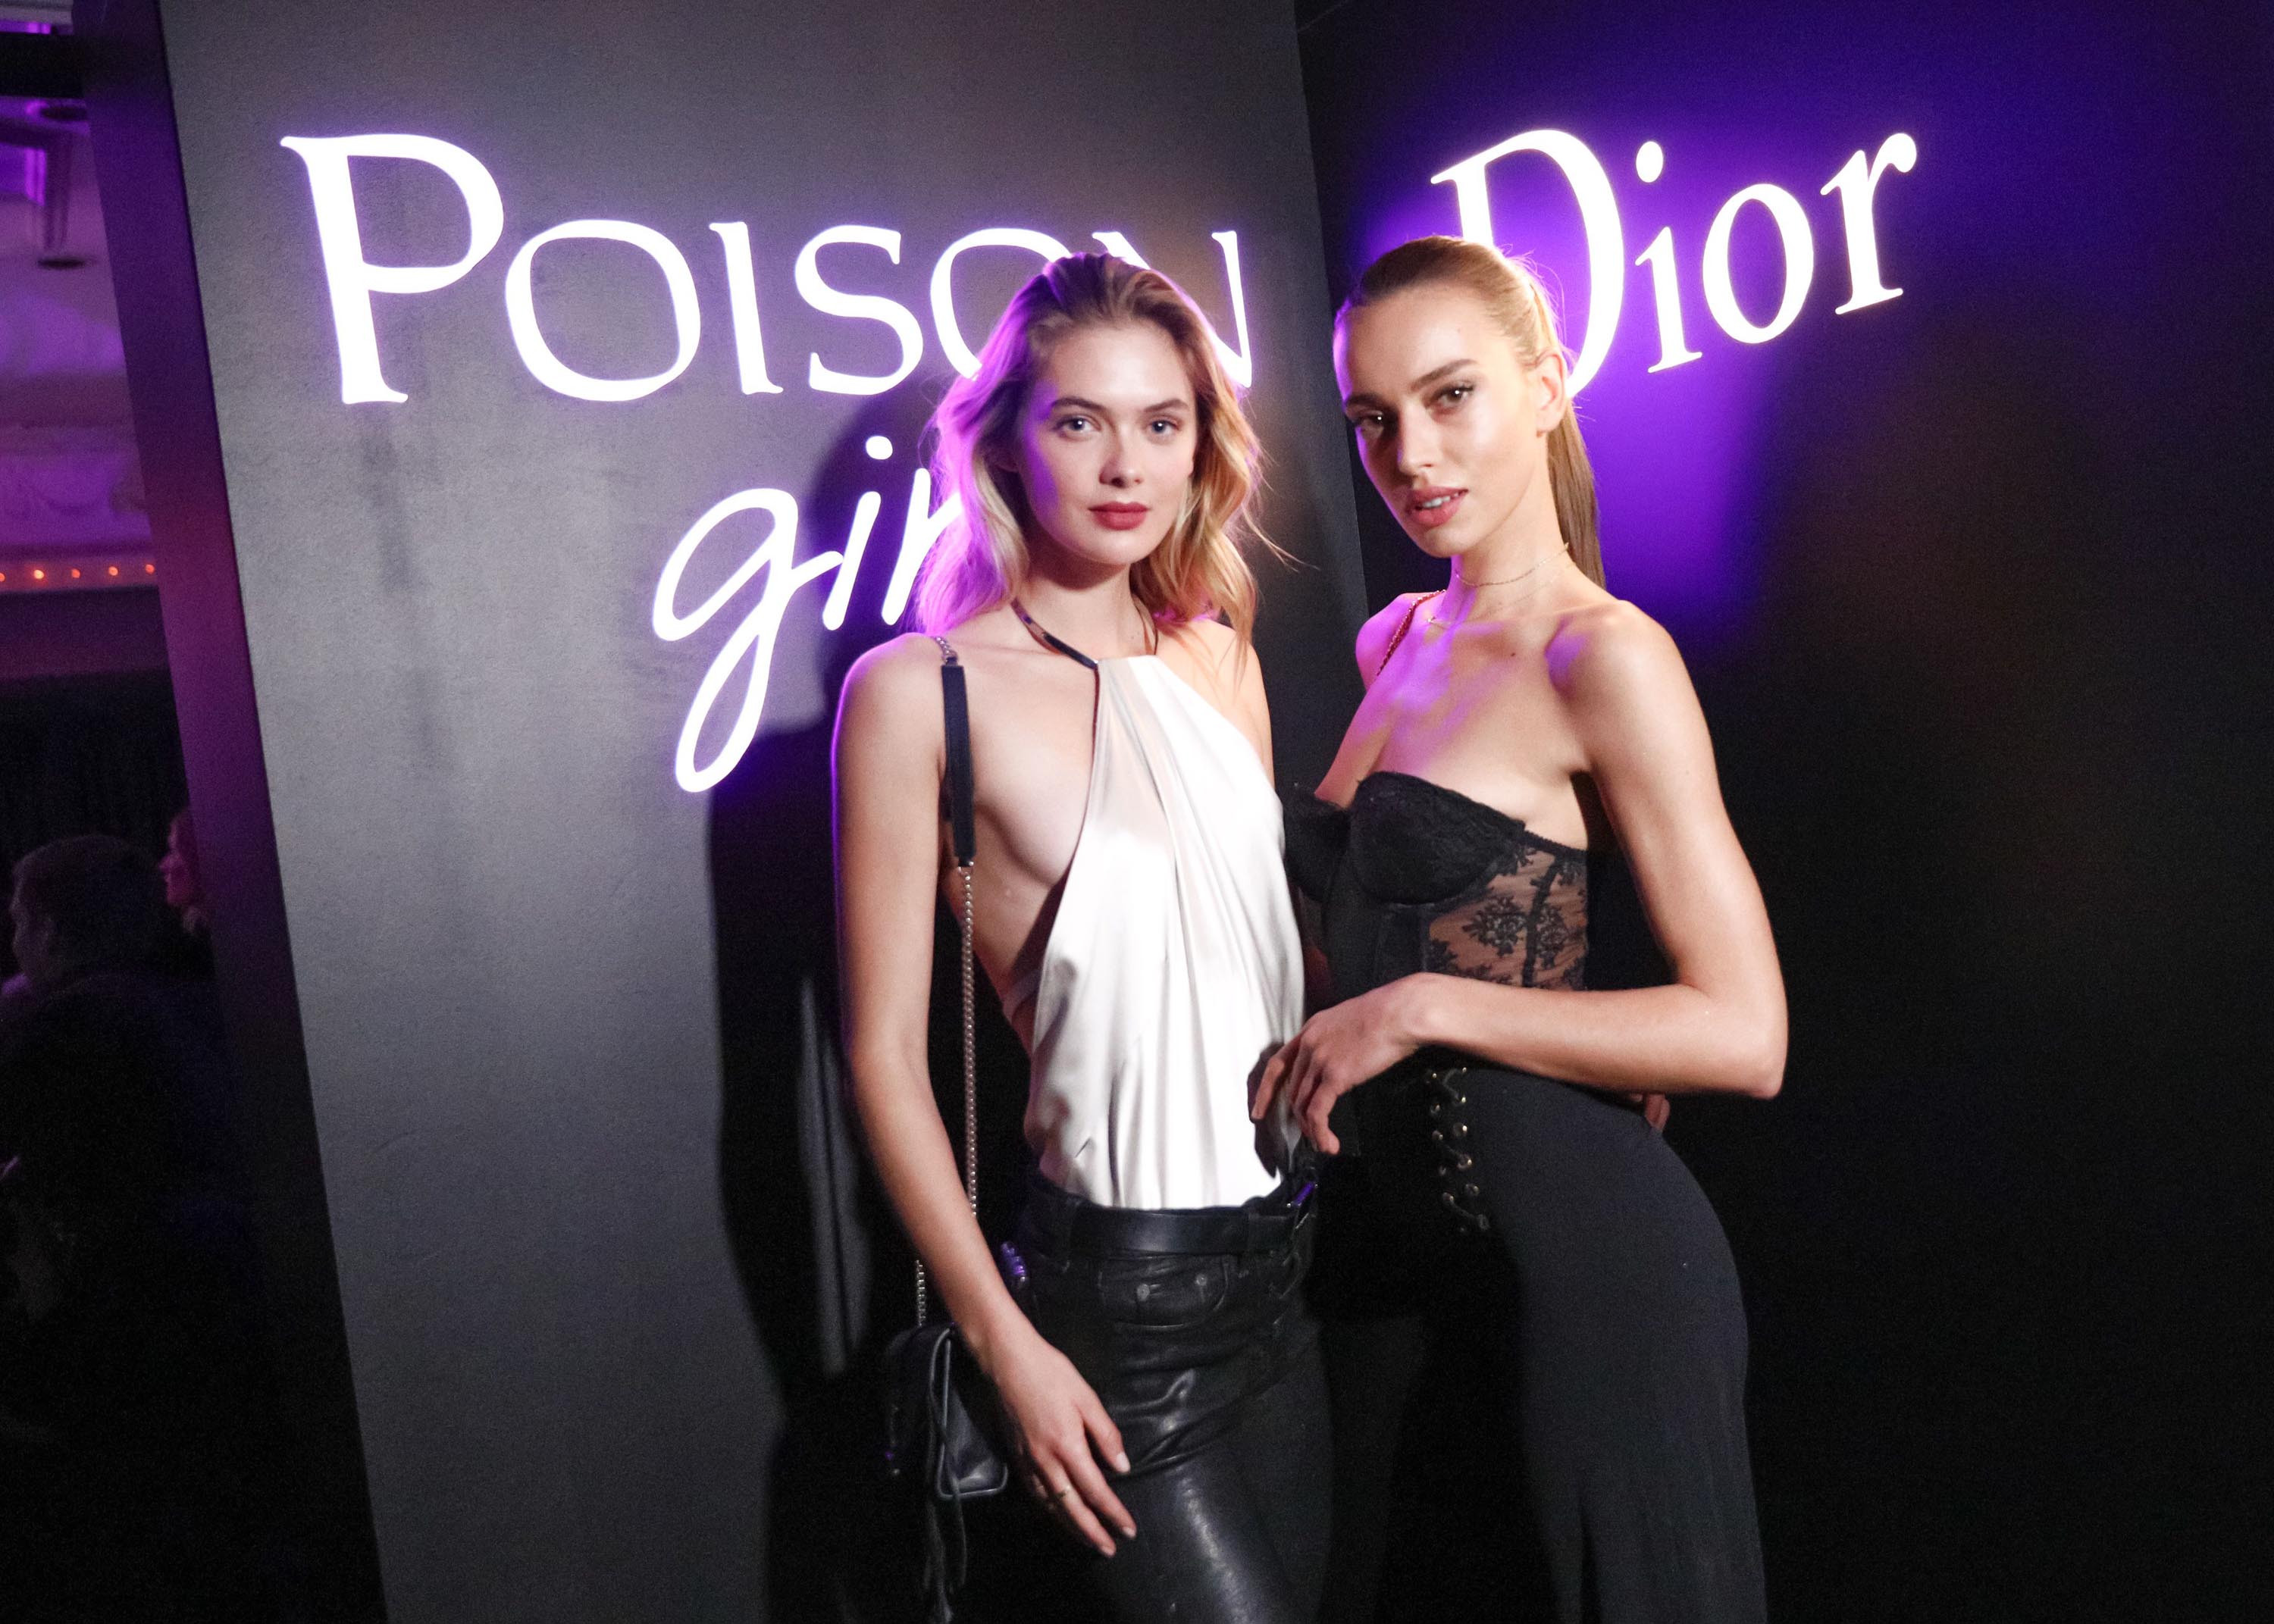 Megan Williams attends NY Poison Club hosted by Dior with Camille Rowe